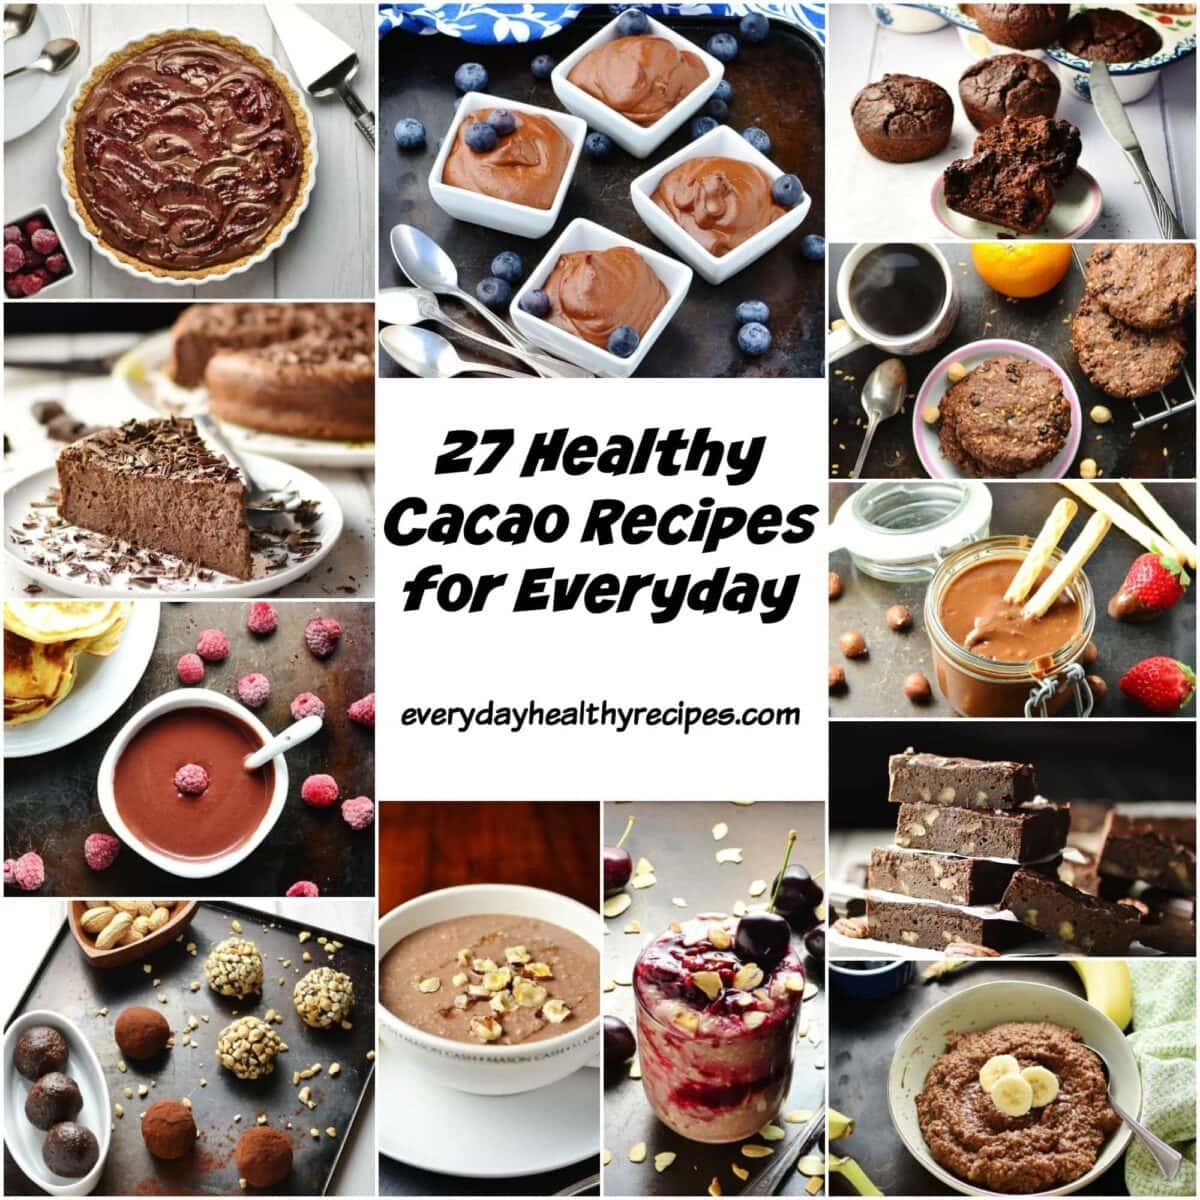 Collage of 12 cacao recipes including muffins, energy balls, porridge, overnight oats, cake and mousse.